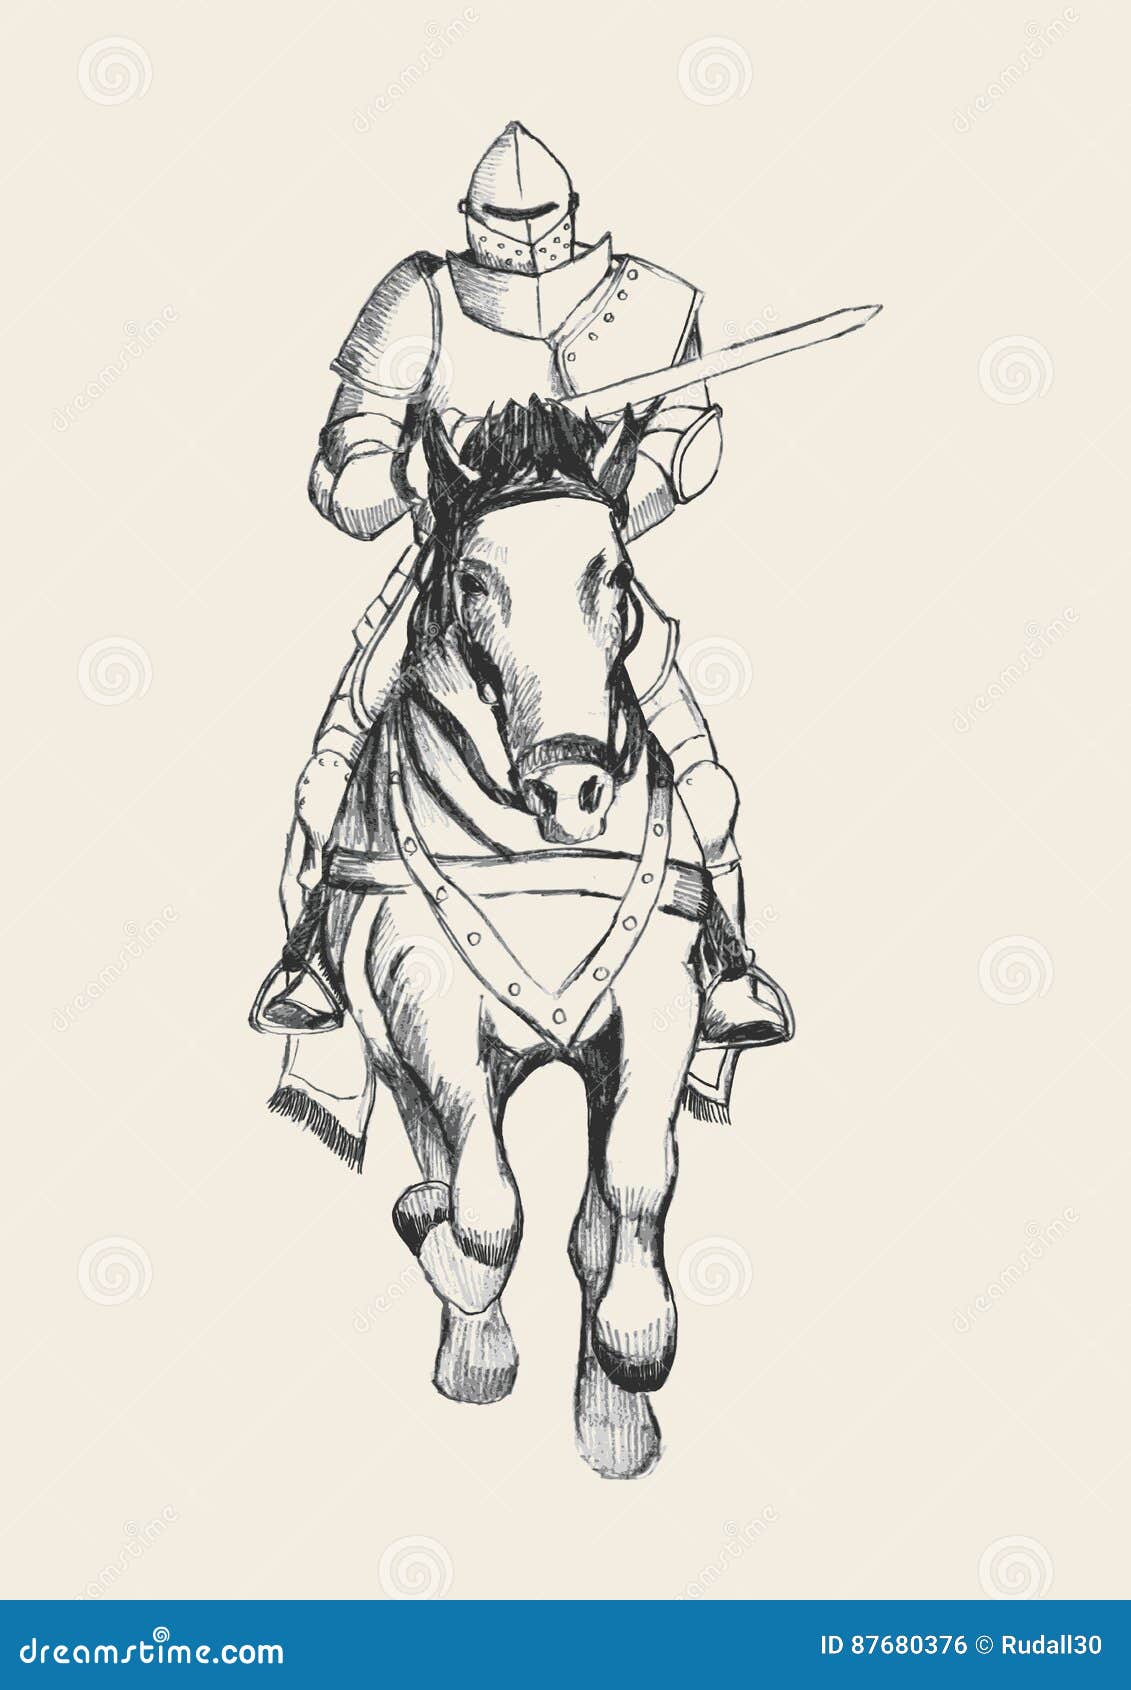 Knight Riding Horse with a Child Holding onto Knight  ClipArt ETC